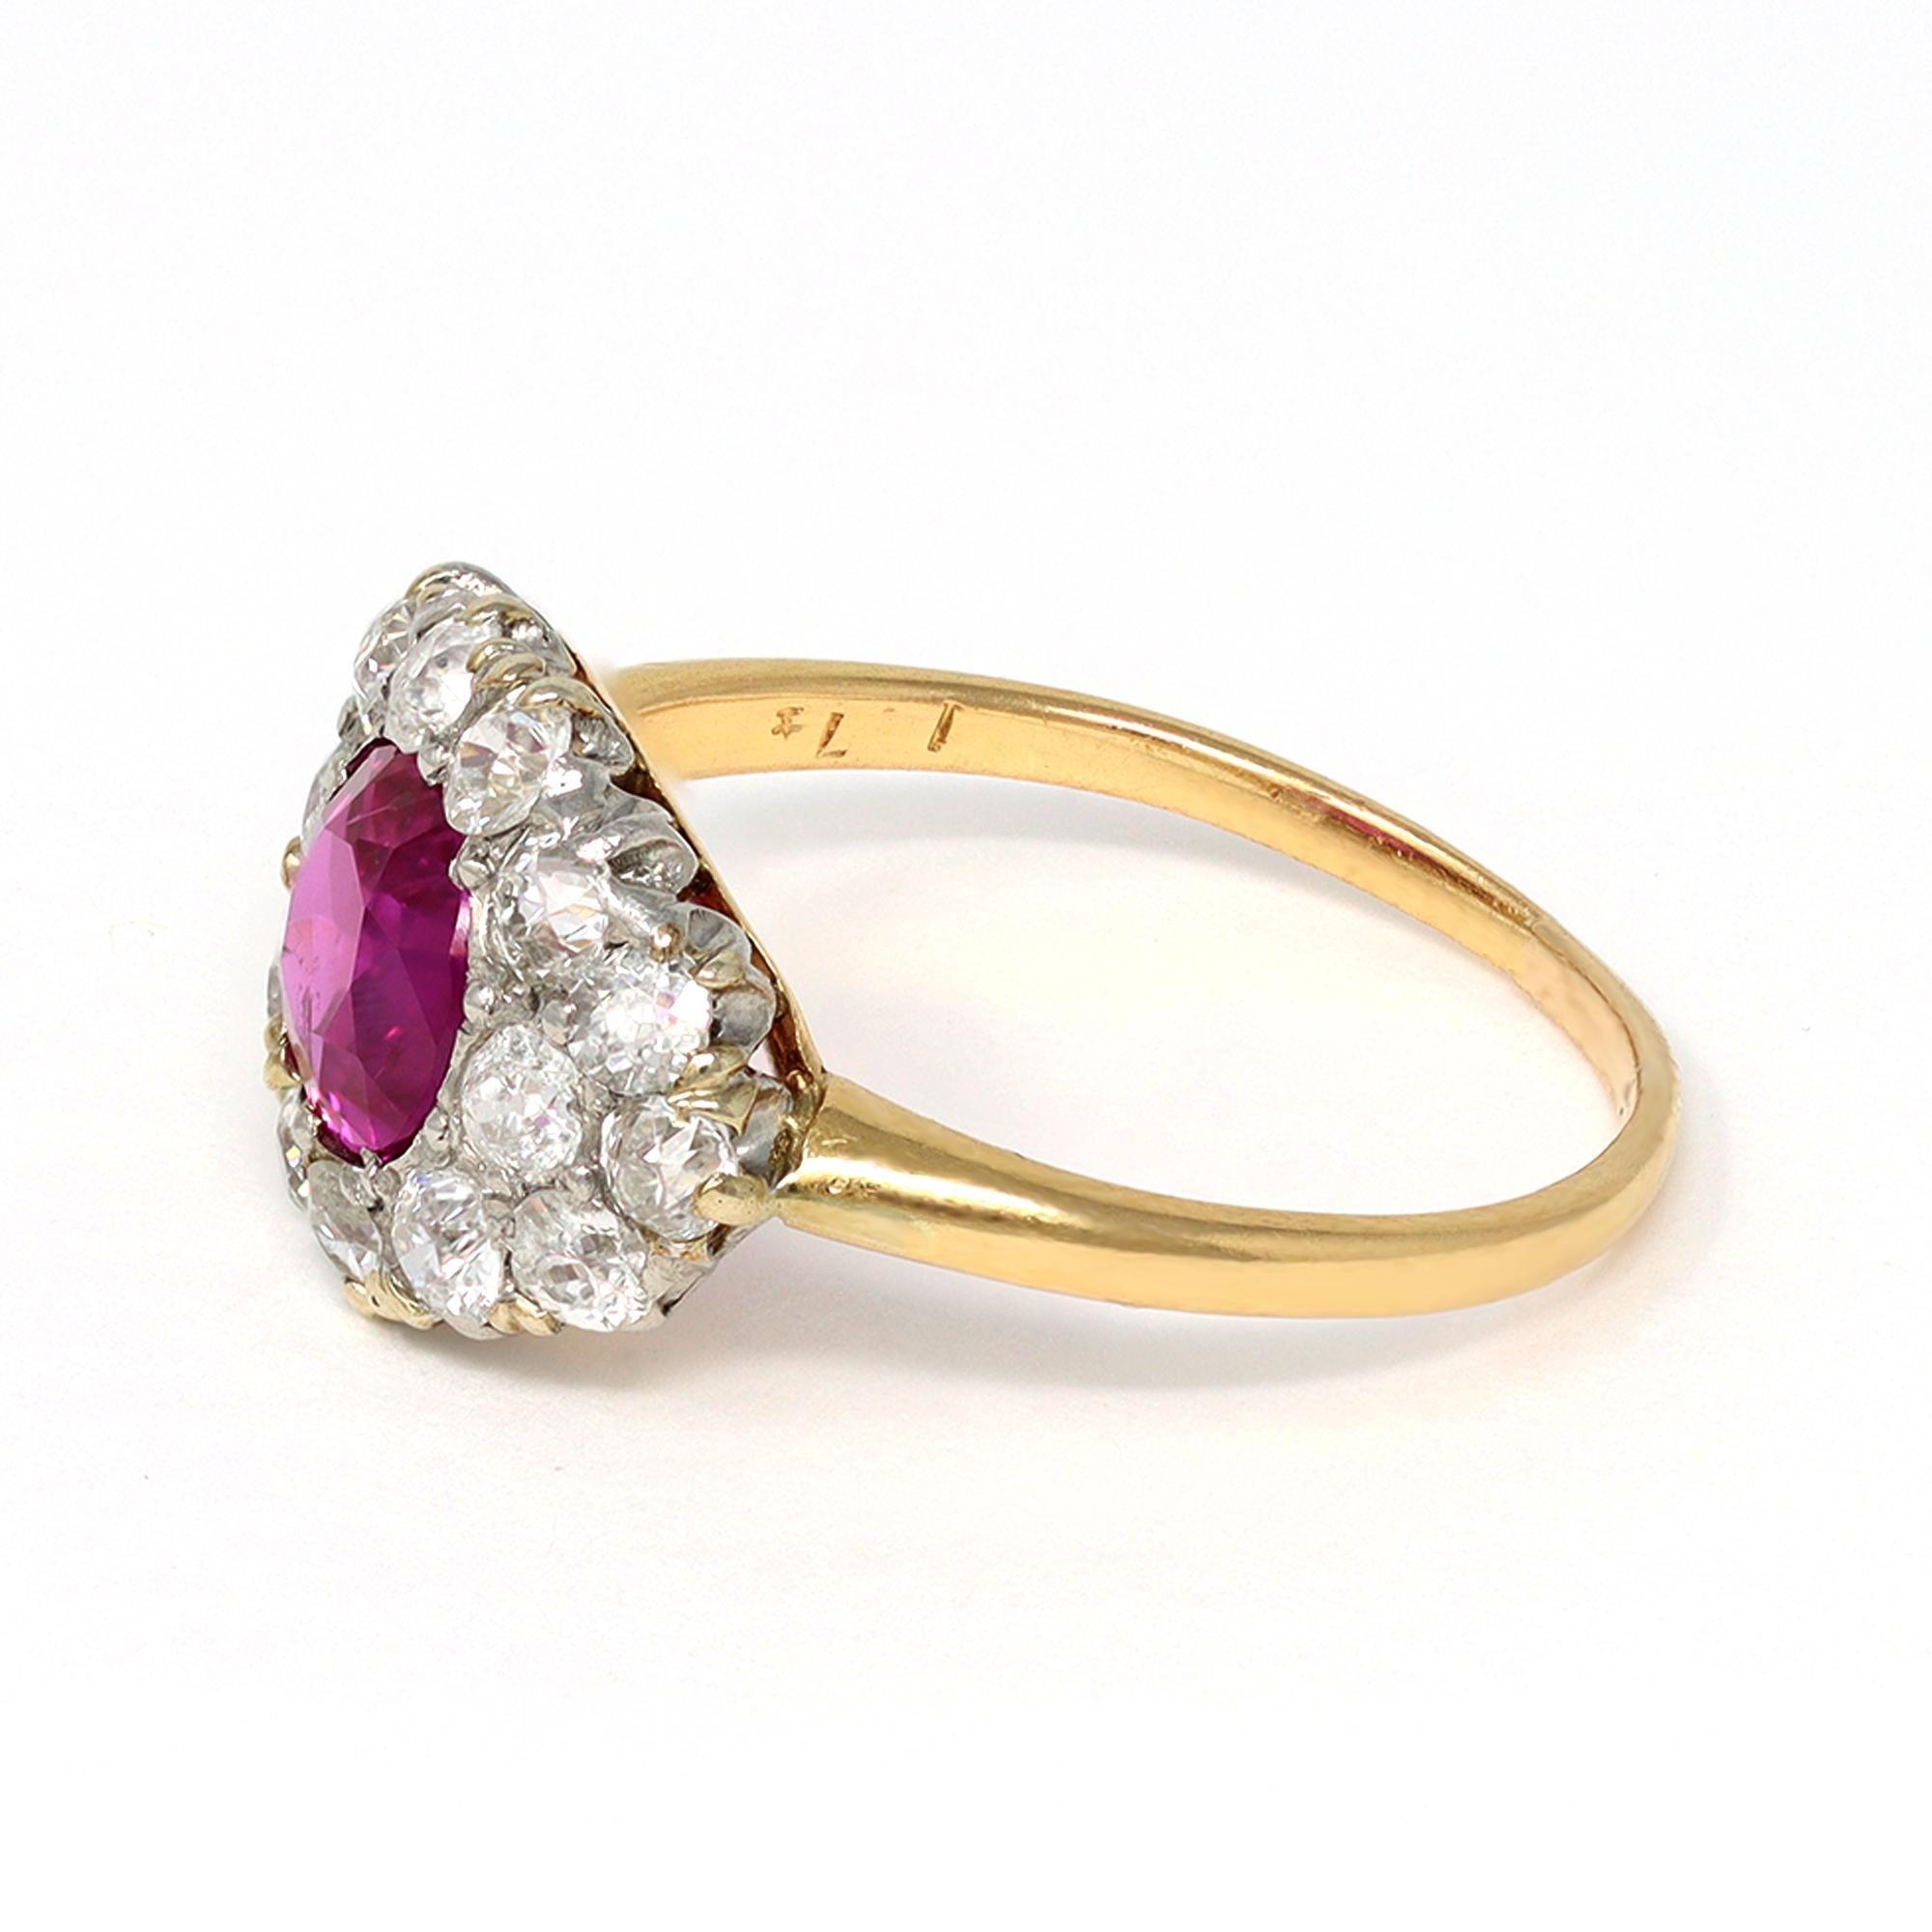 The ring is Victorian, circa 1890. It presents an old cut oval ruby with very good crystal accompanied by GIA report #2193963124, stating the ruby is 1.42 carats, Burma origin, with no indication of heat treatment.  It is surrounded by old mine-cut